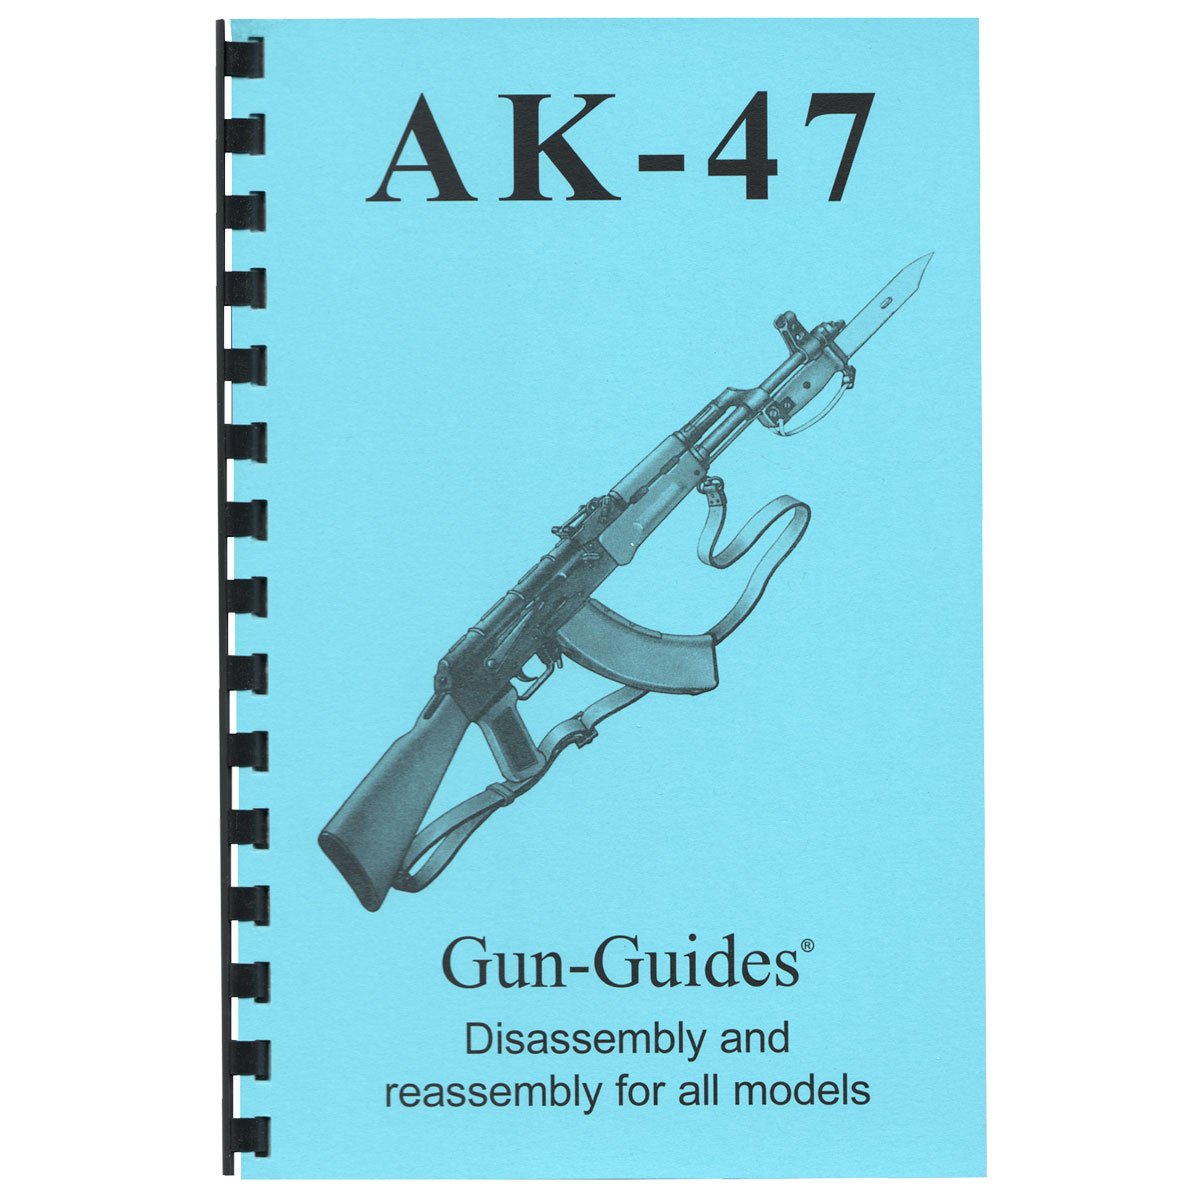 GUN-GUIDES - ASSEMBLY AND DISASSEMBLY GUIDE FOR AK-47, AKM AND ALL VARIENTS